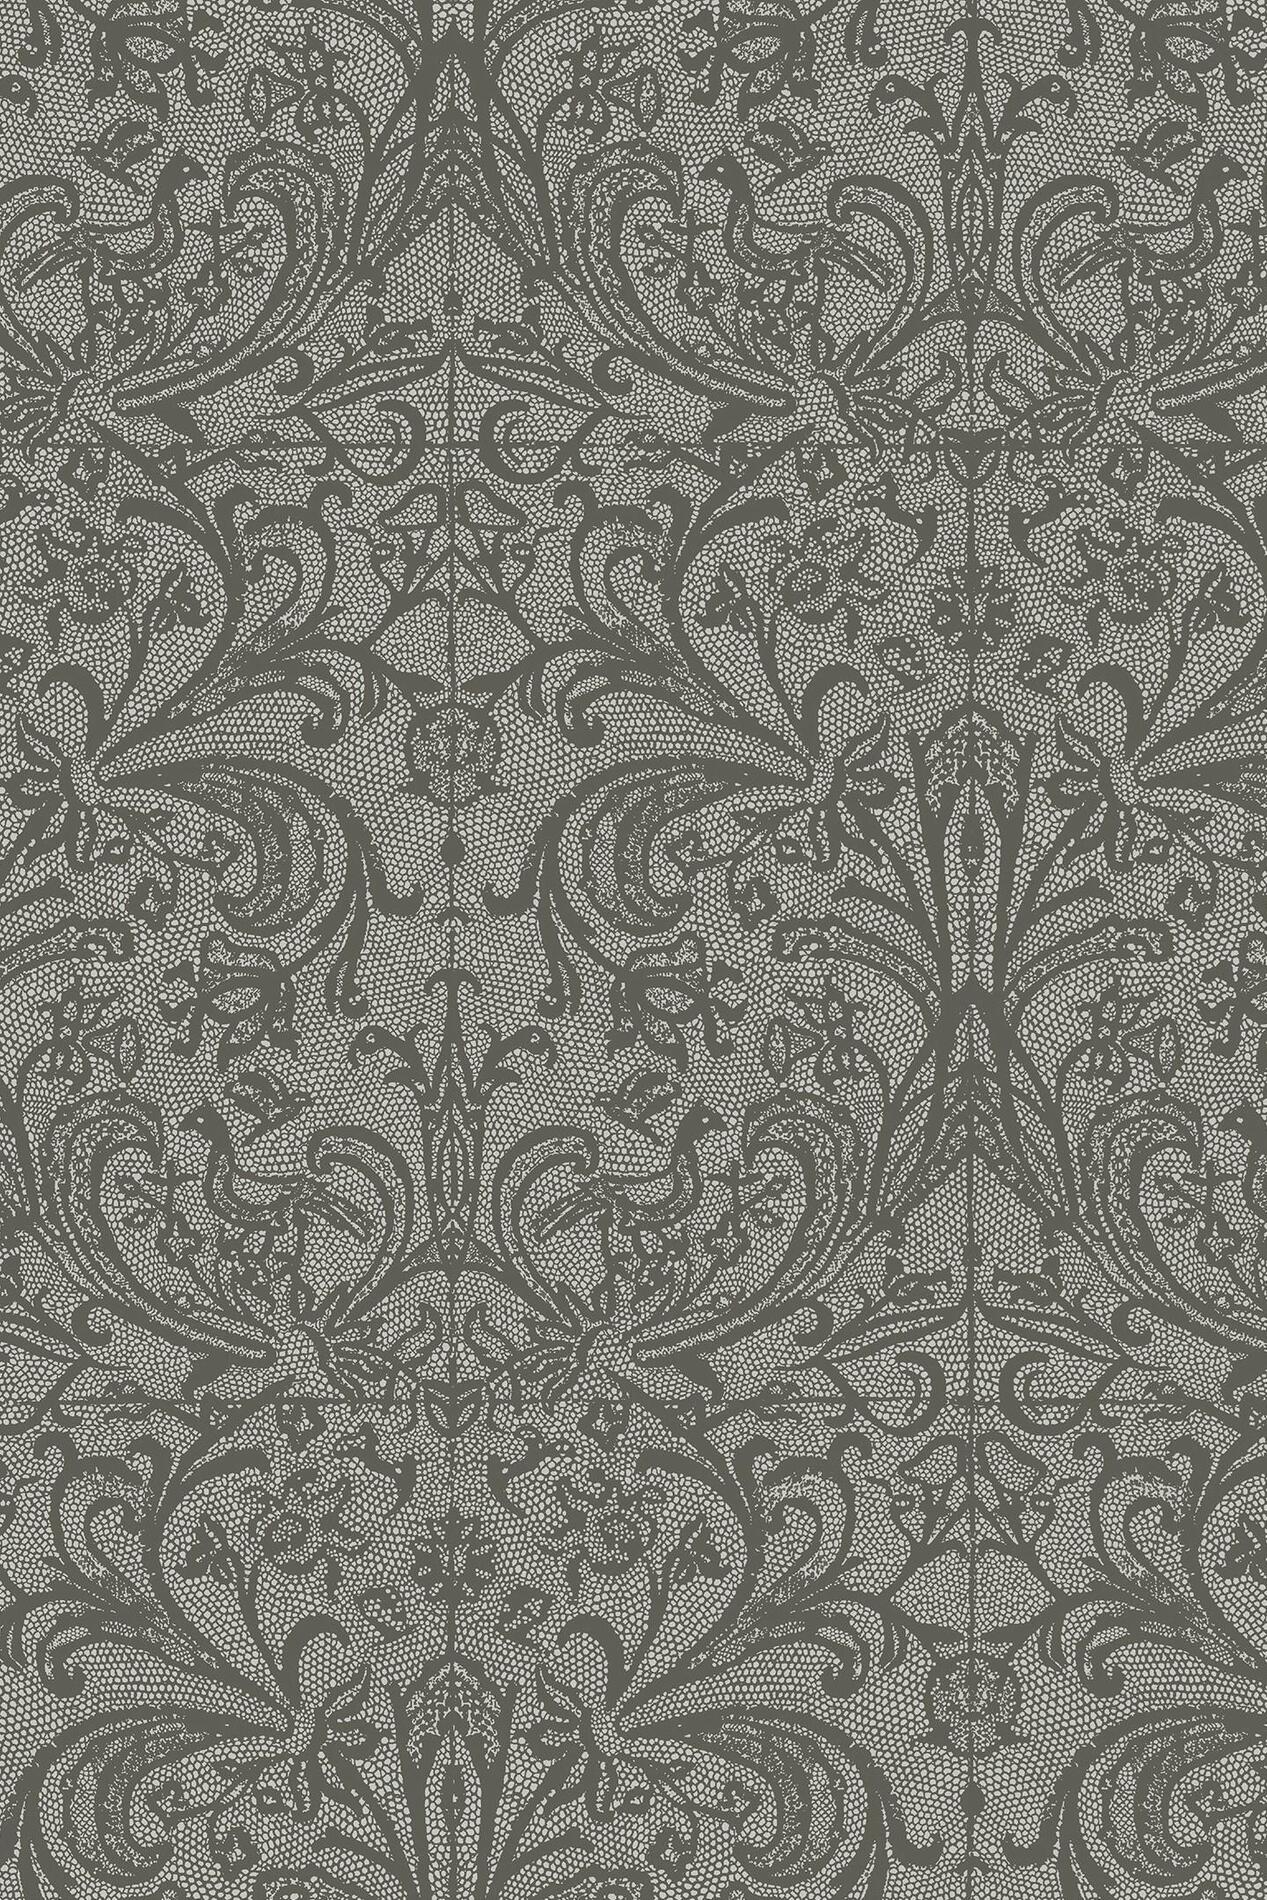 hooked-on-walls-classy-vibes-graceful-wallcovering-15515